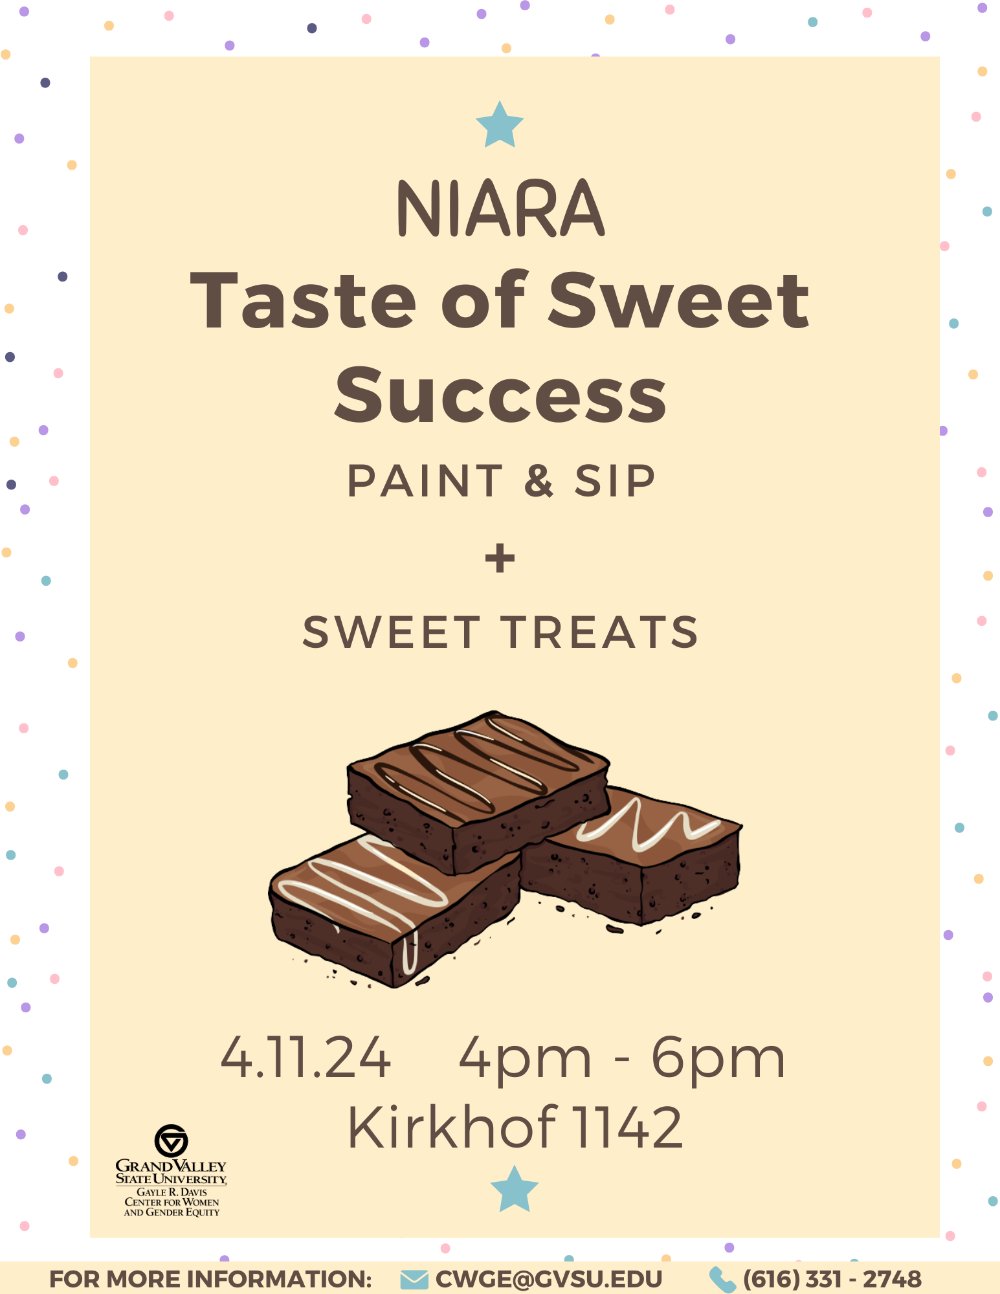 NIARA: Taste of Sweet Success . Join us for sweet treats and a fun paint and sip! April 11th, 2024 | Kirkhof 1142 | 4 p.m. to 6 p.m.